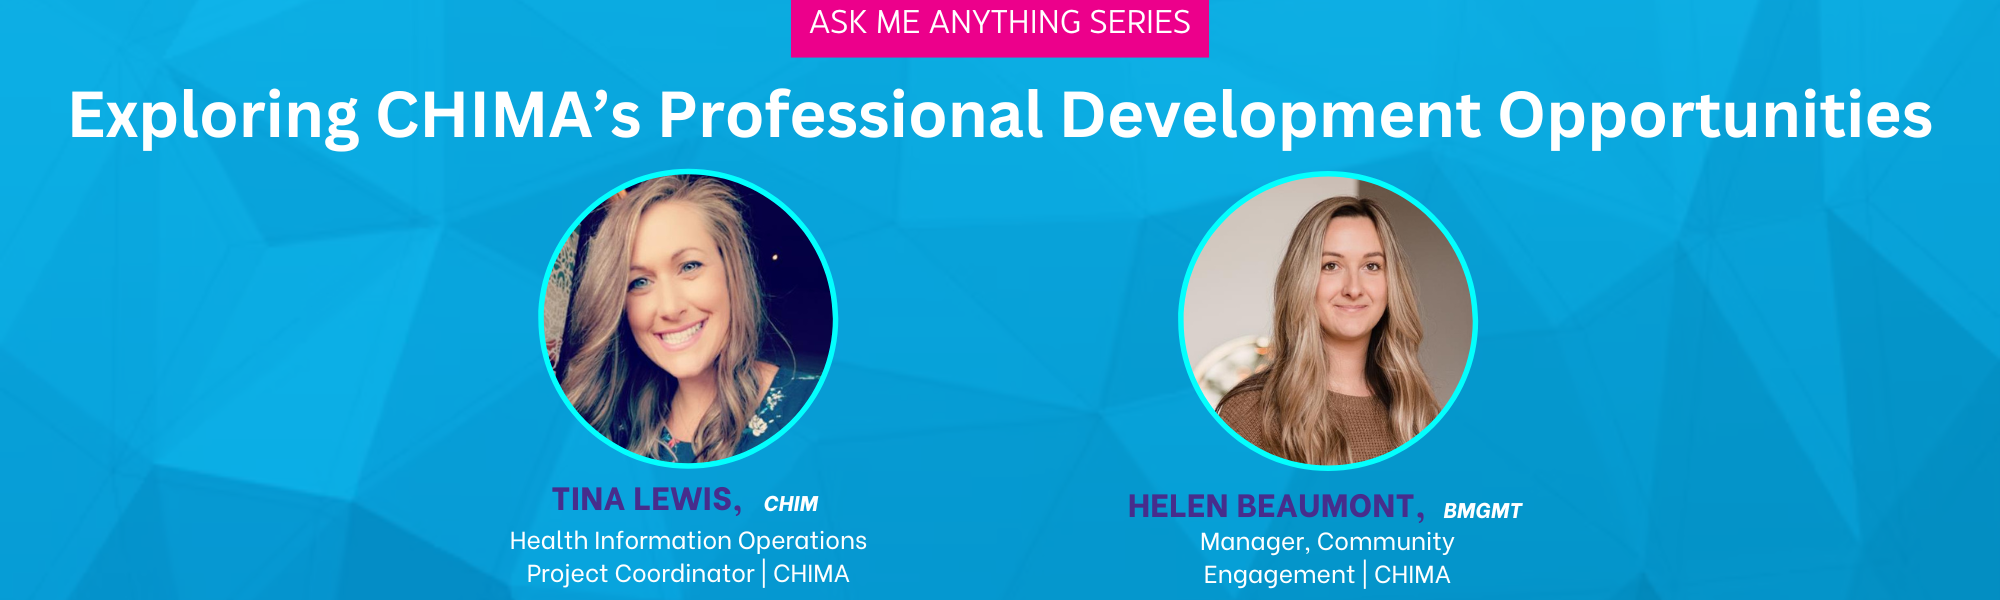 Ask Me Anything: Exploring CHIMA’s Professional Development Opportunities